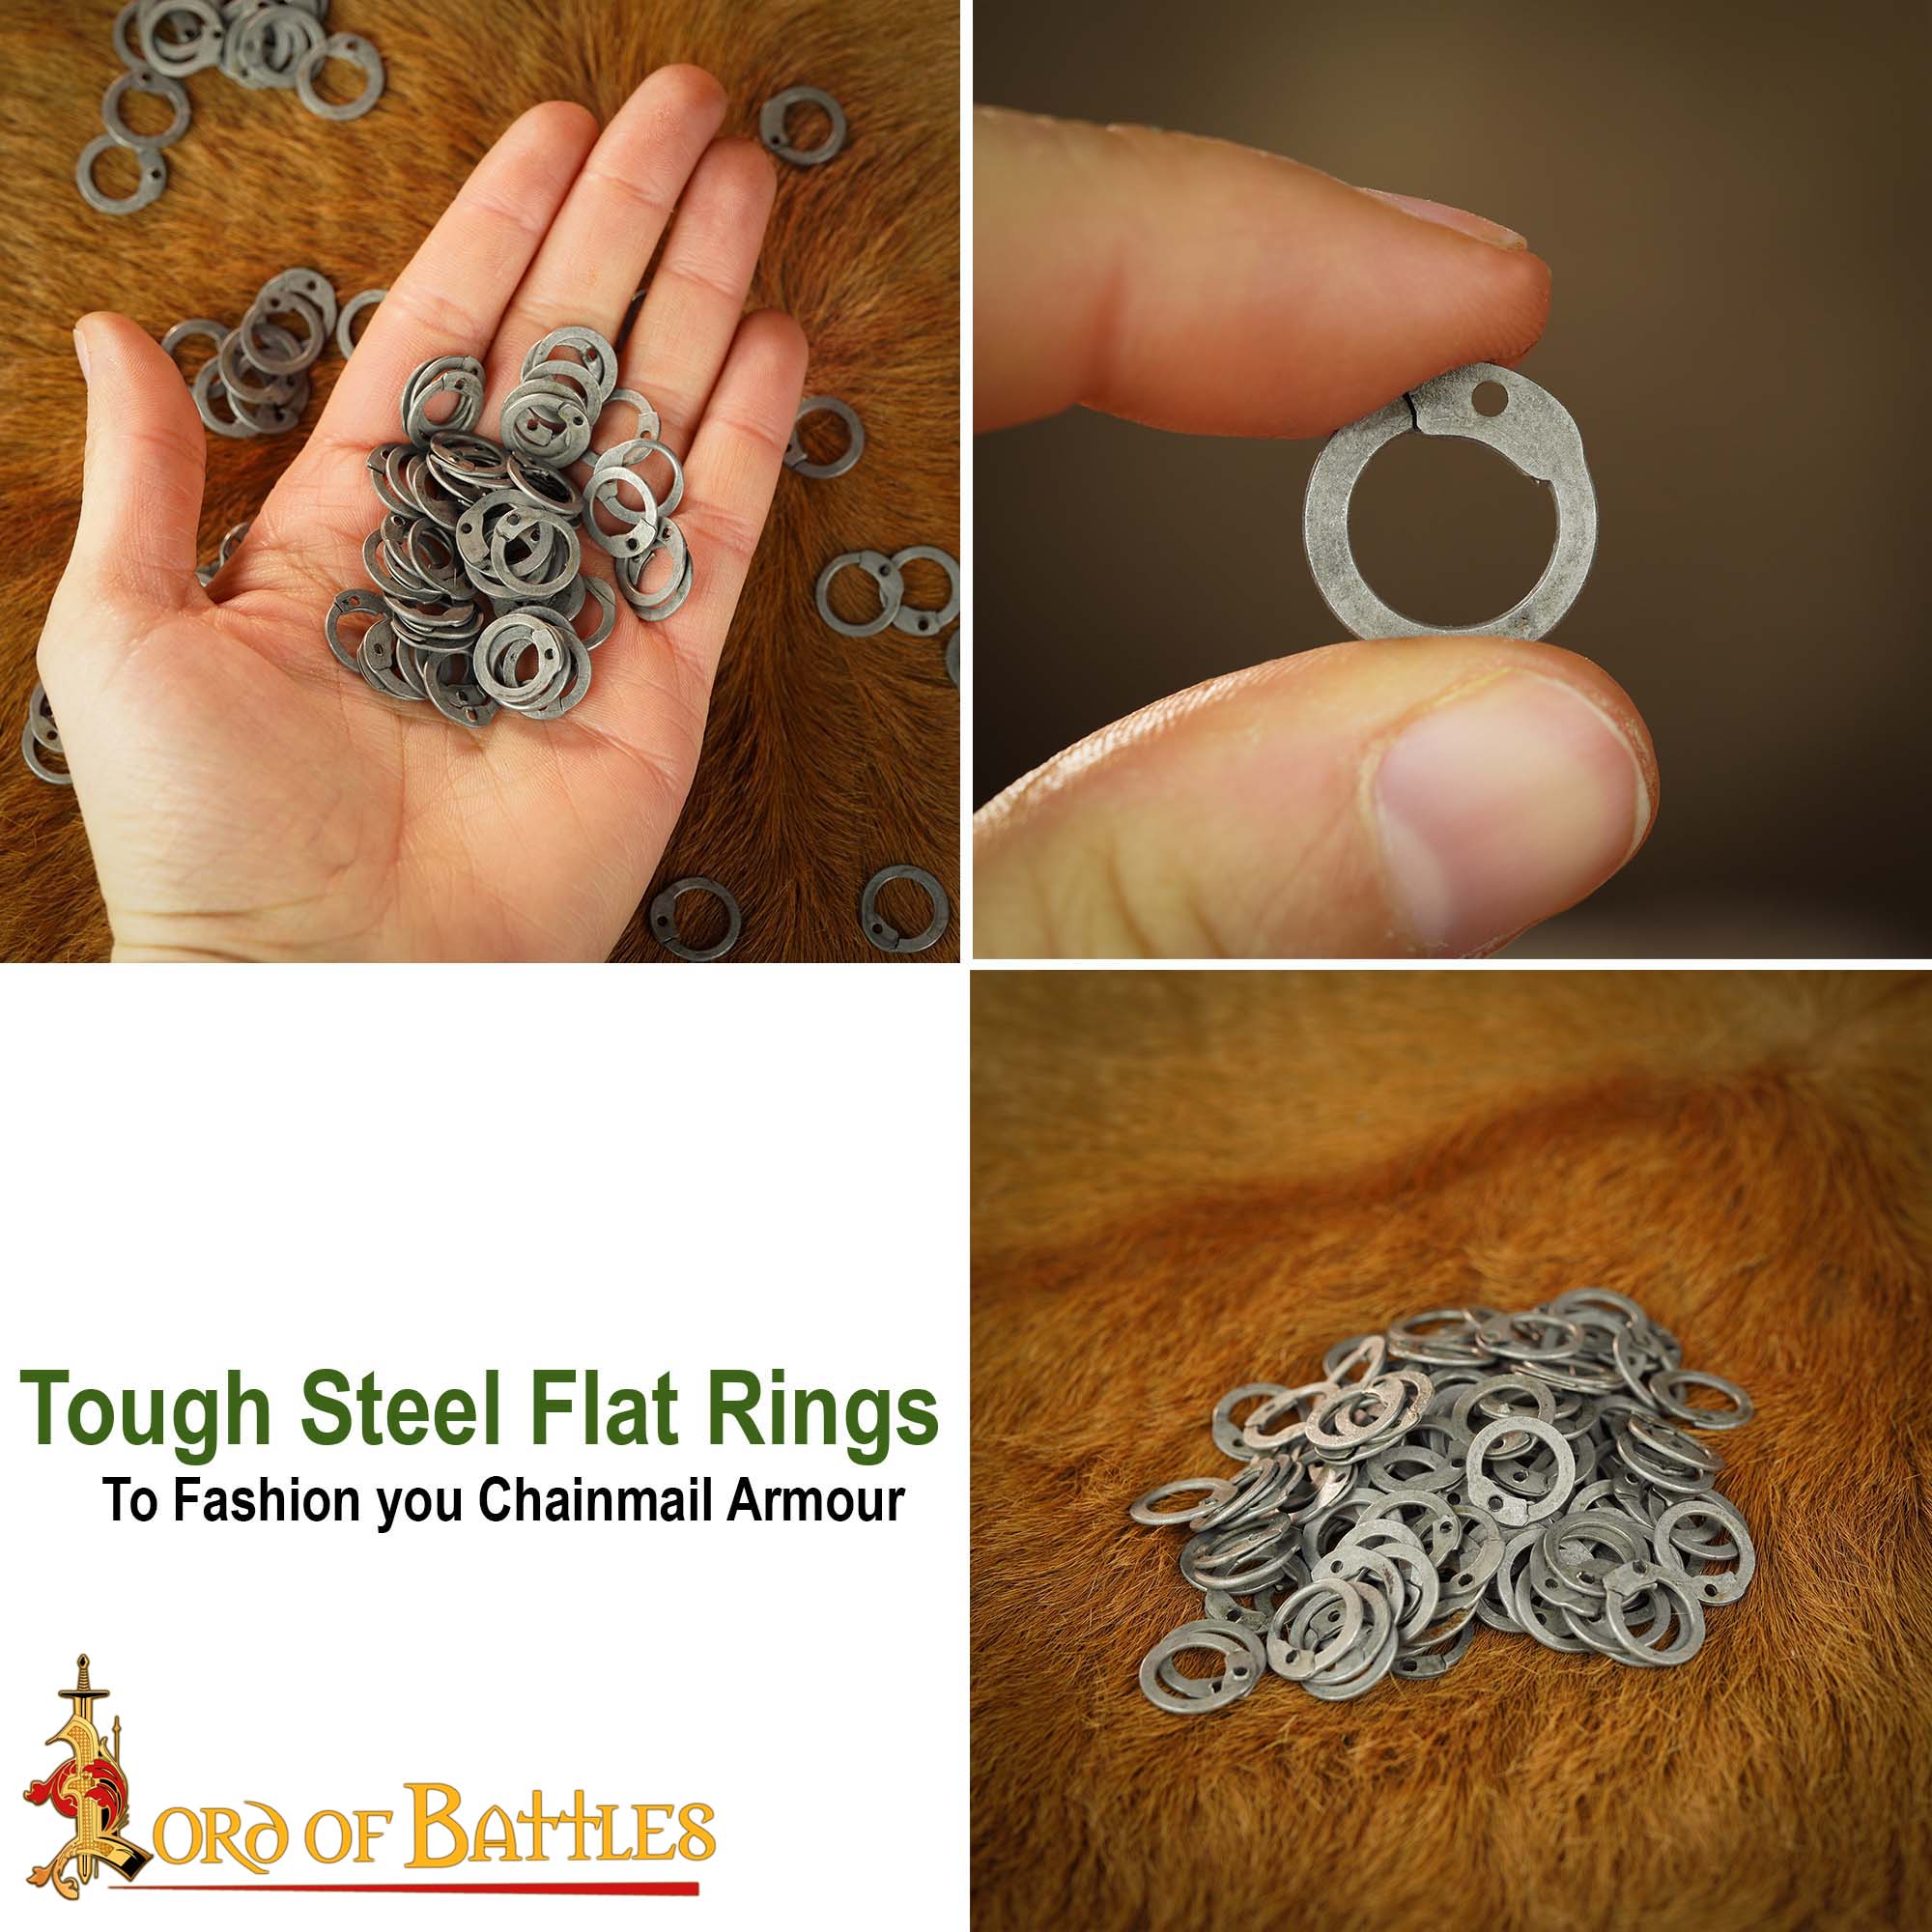 1 kg Loose Chainmail Rings - Milld Steel Wire Round Rings